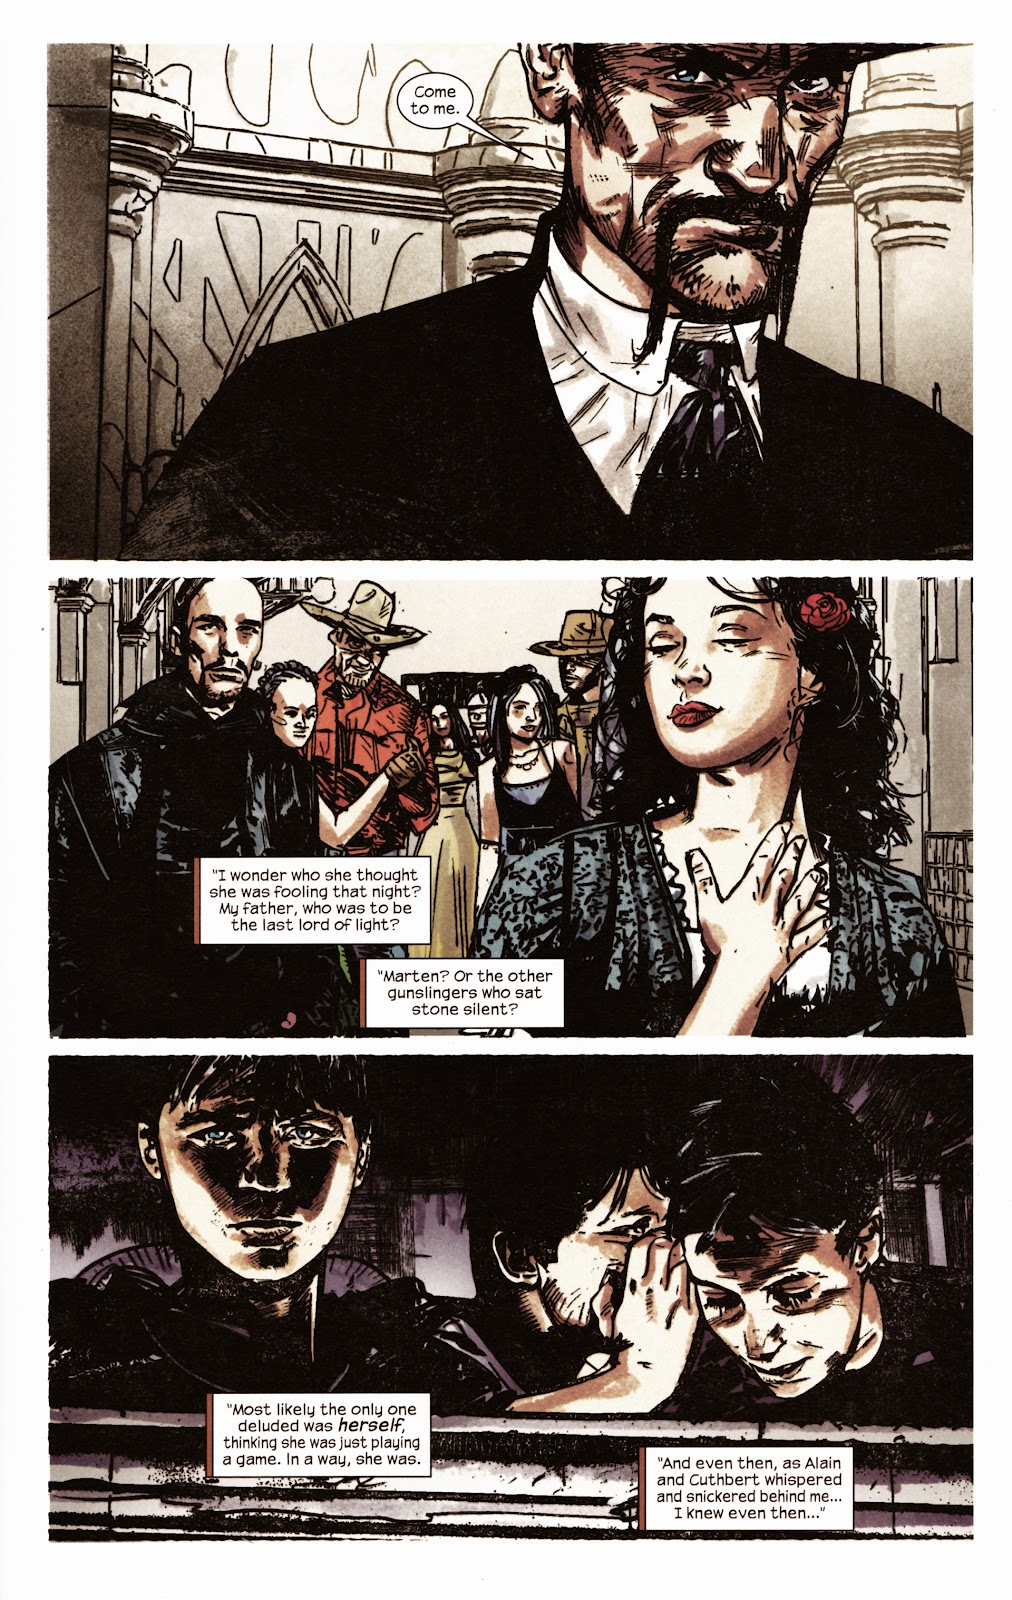 Dark Tower: The Gunslinger - The Man in Black issue 2 - Page 20